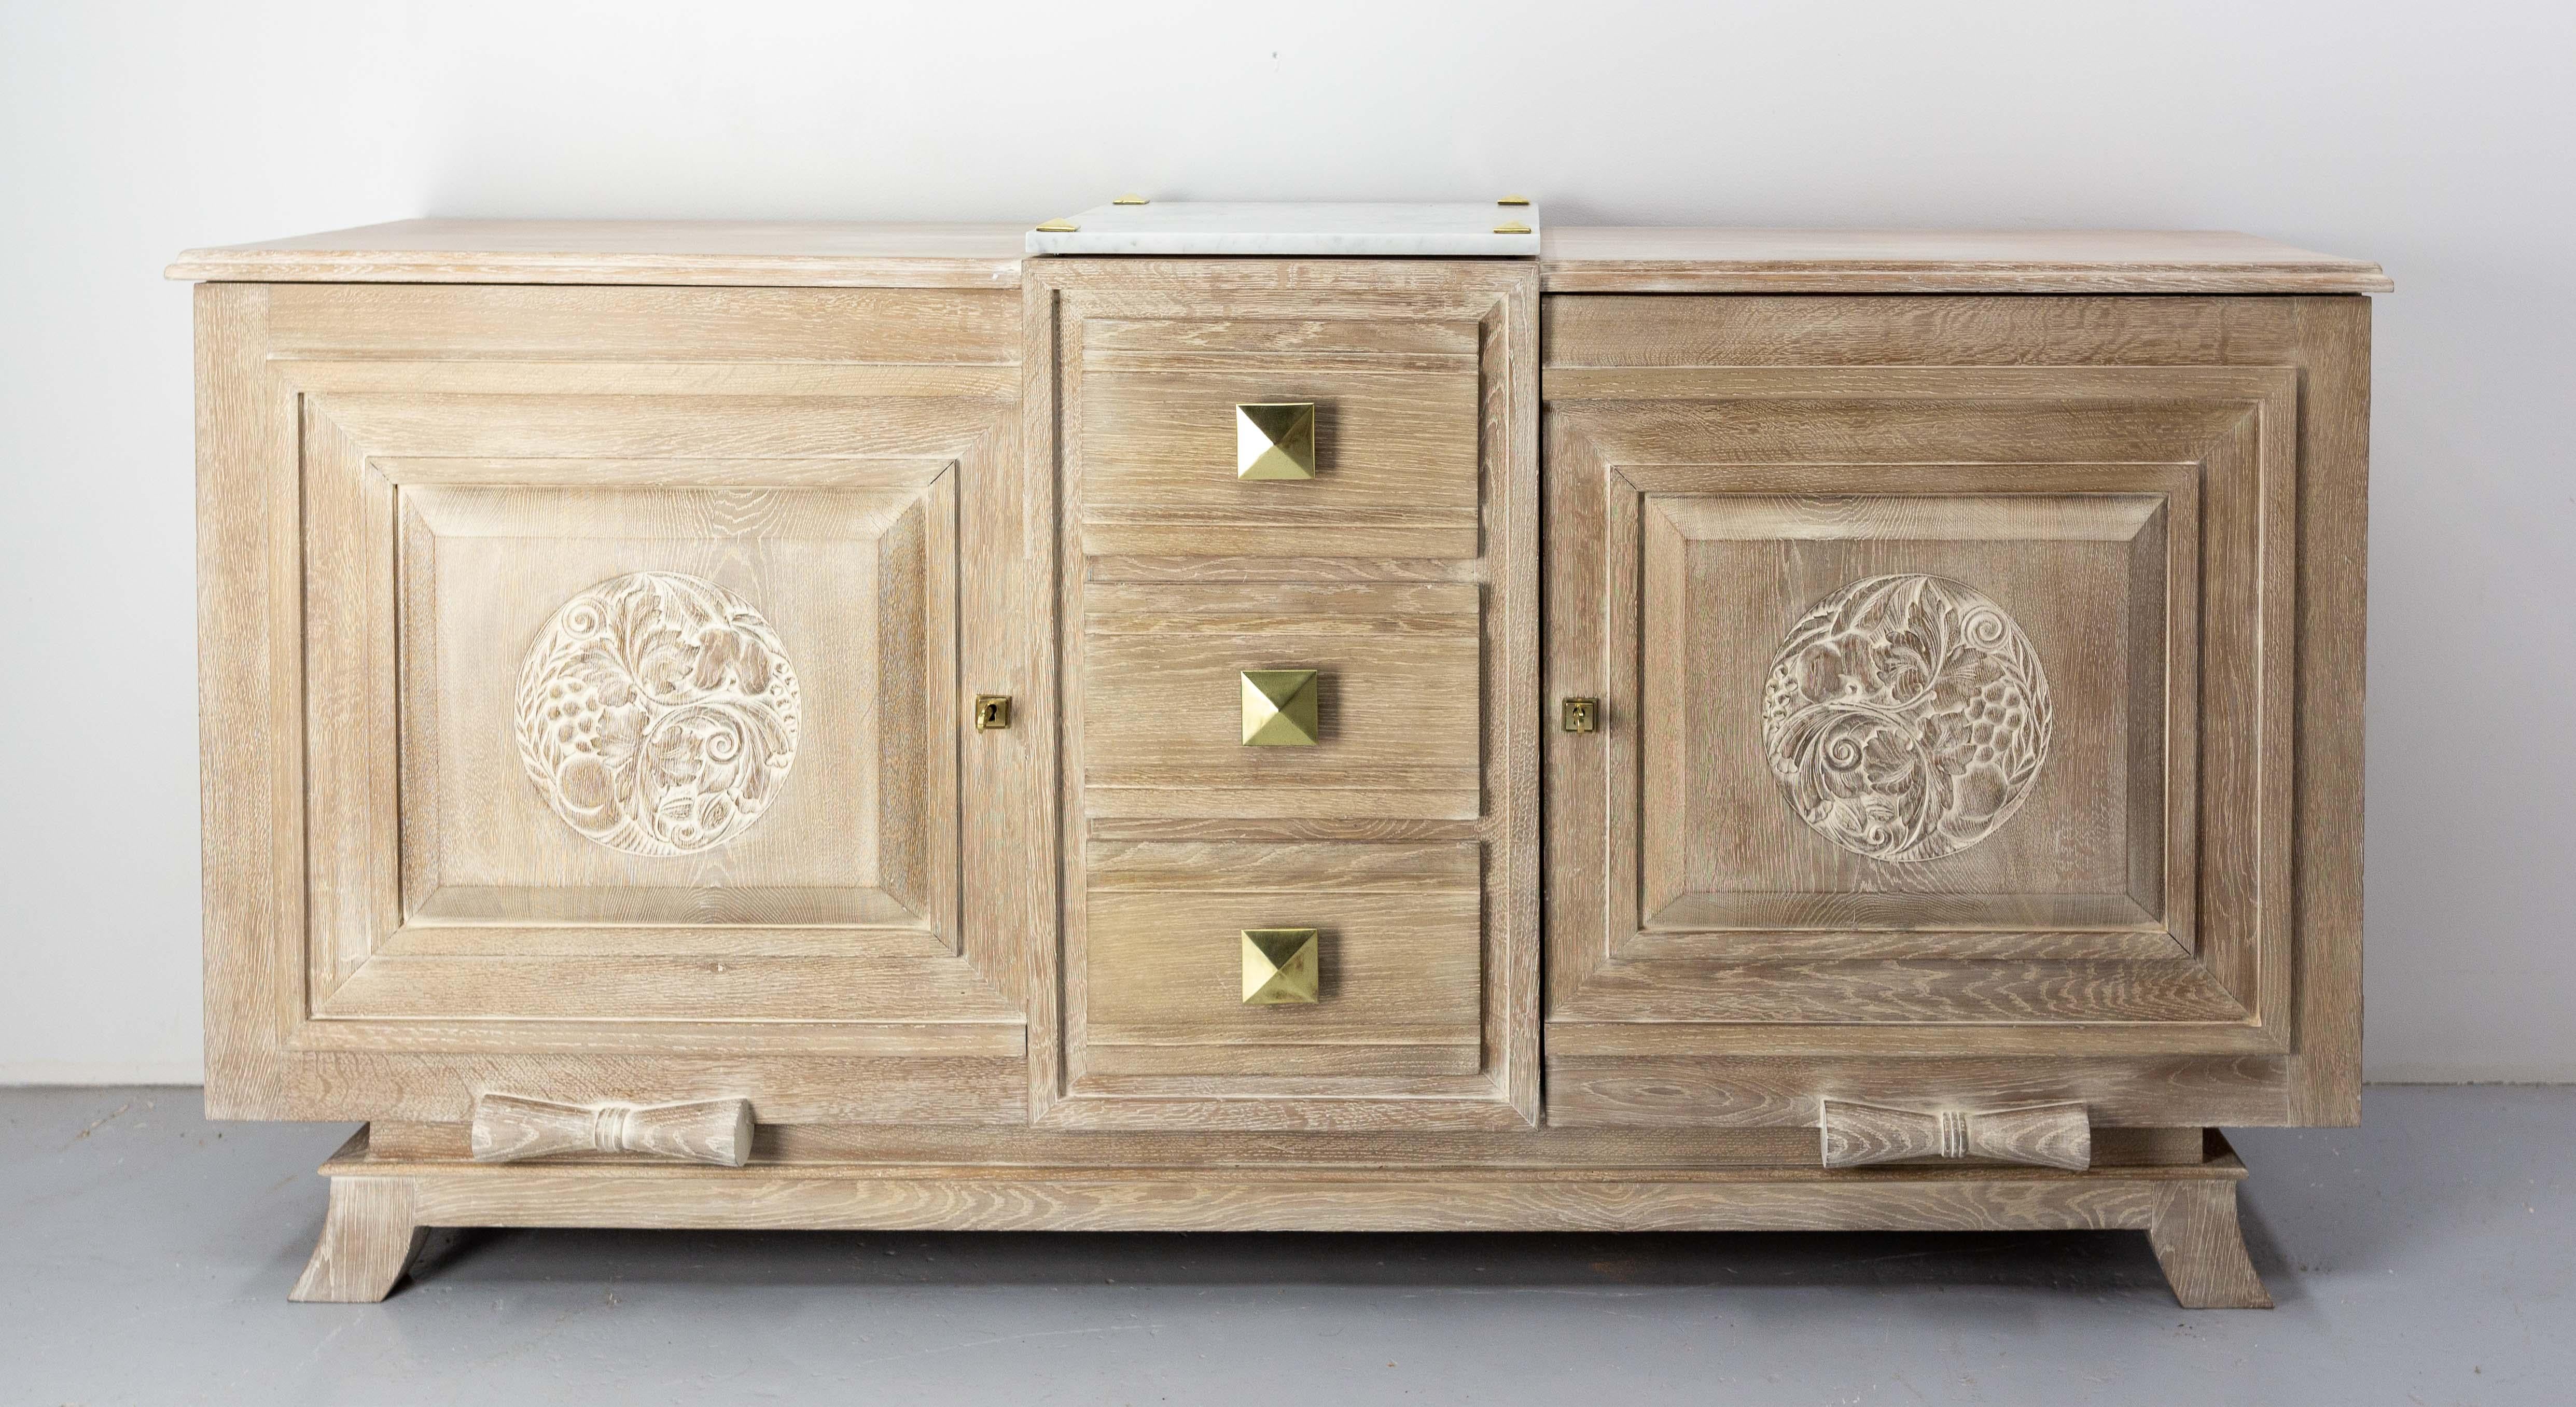 Art Déco French buffet cerused oak, marble top and brass.
The floral bas-reliefs are highlighted by the white ceruse.
Made circa 1930
Two doors and three drawers.
Completely redone finishes.
Two traces of an old buffet hut are visible on the